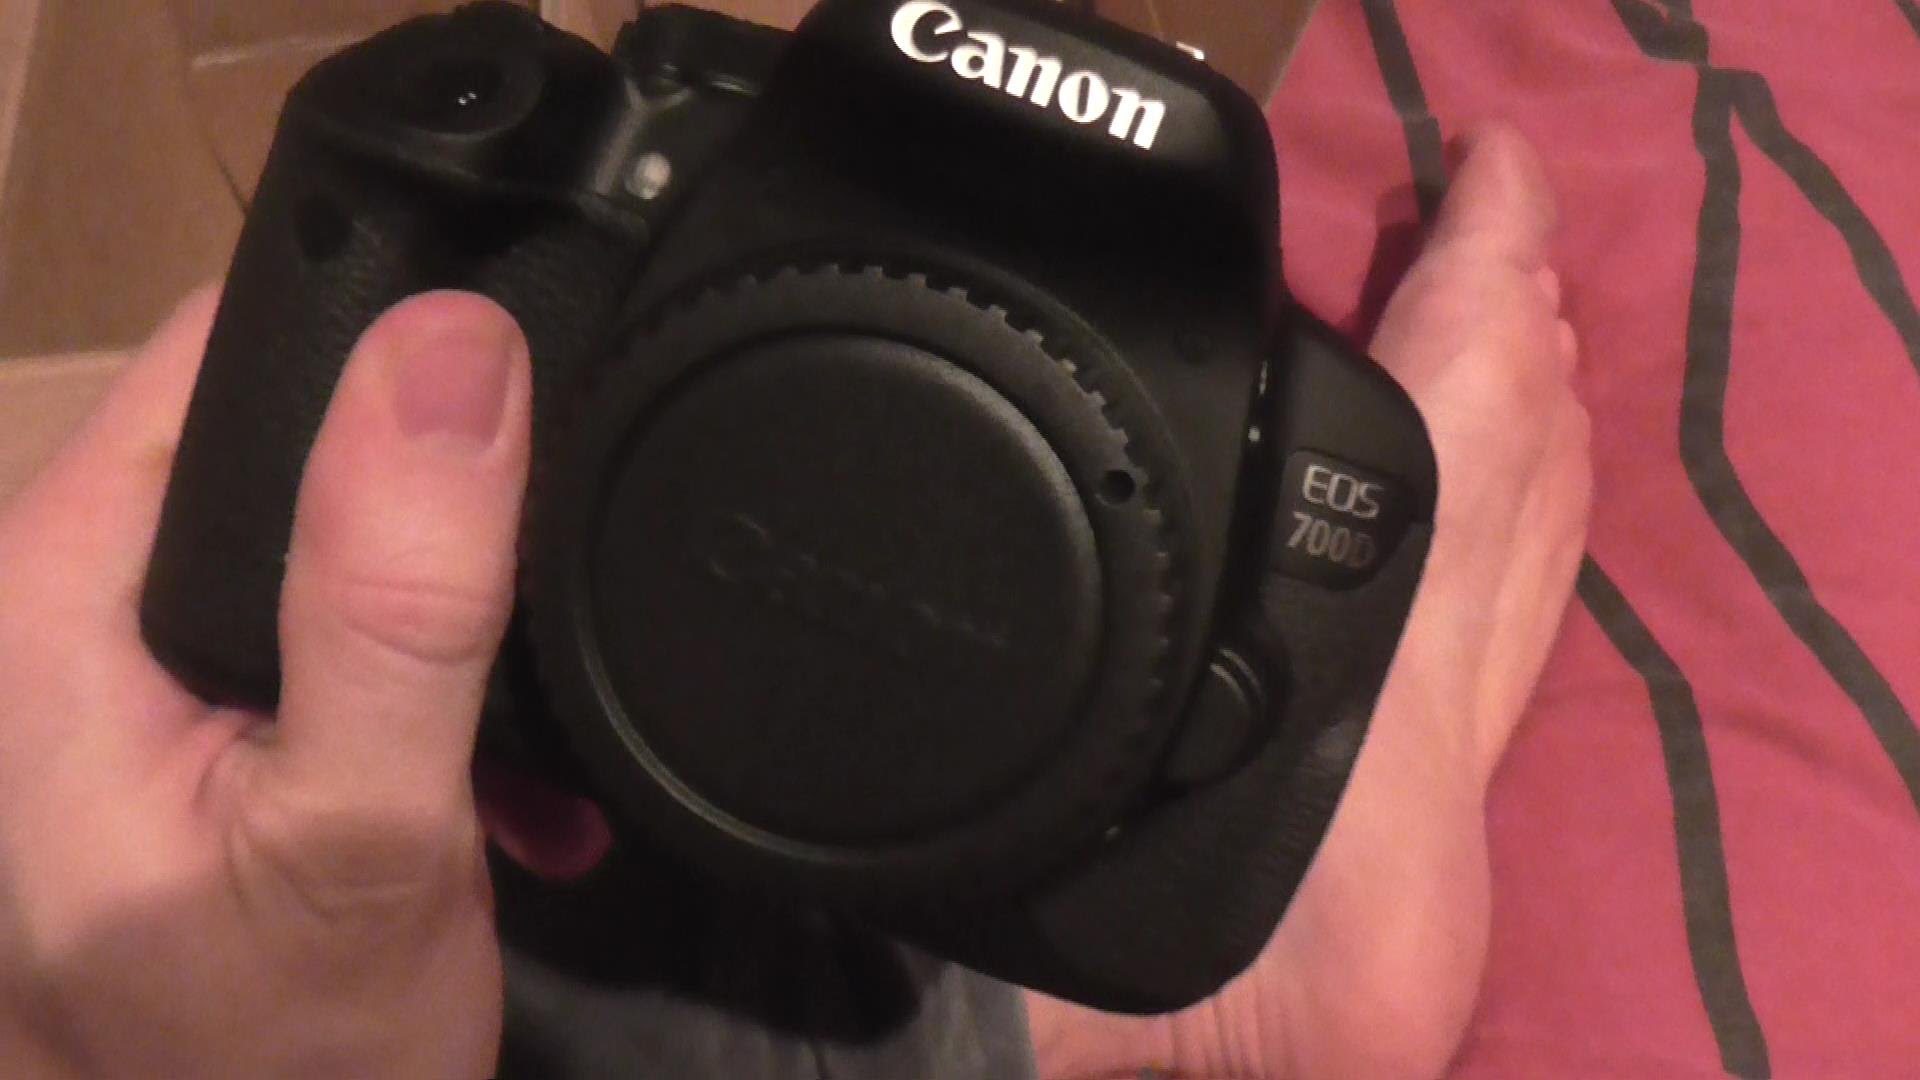 My New Canon EOS 700D Camera (Unboxing)